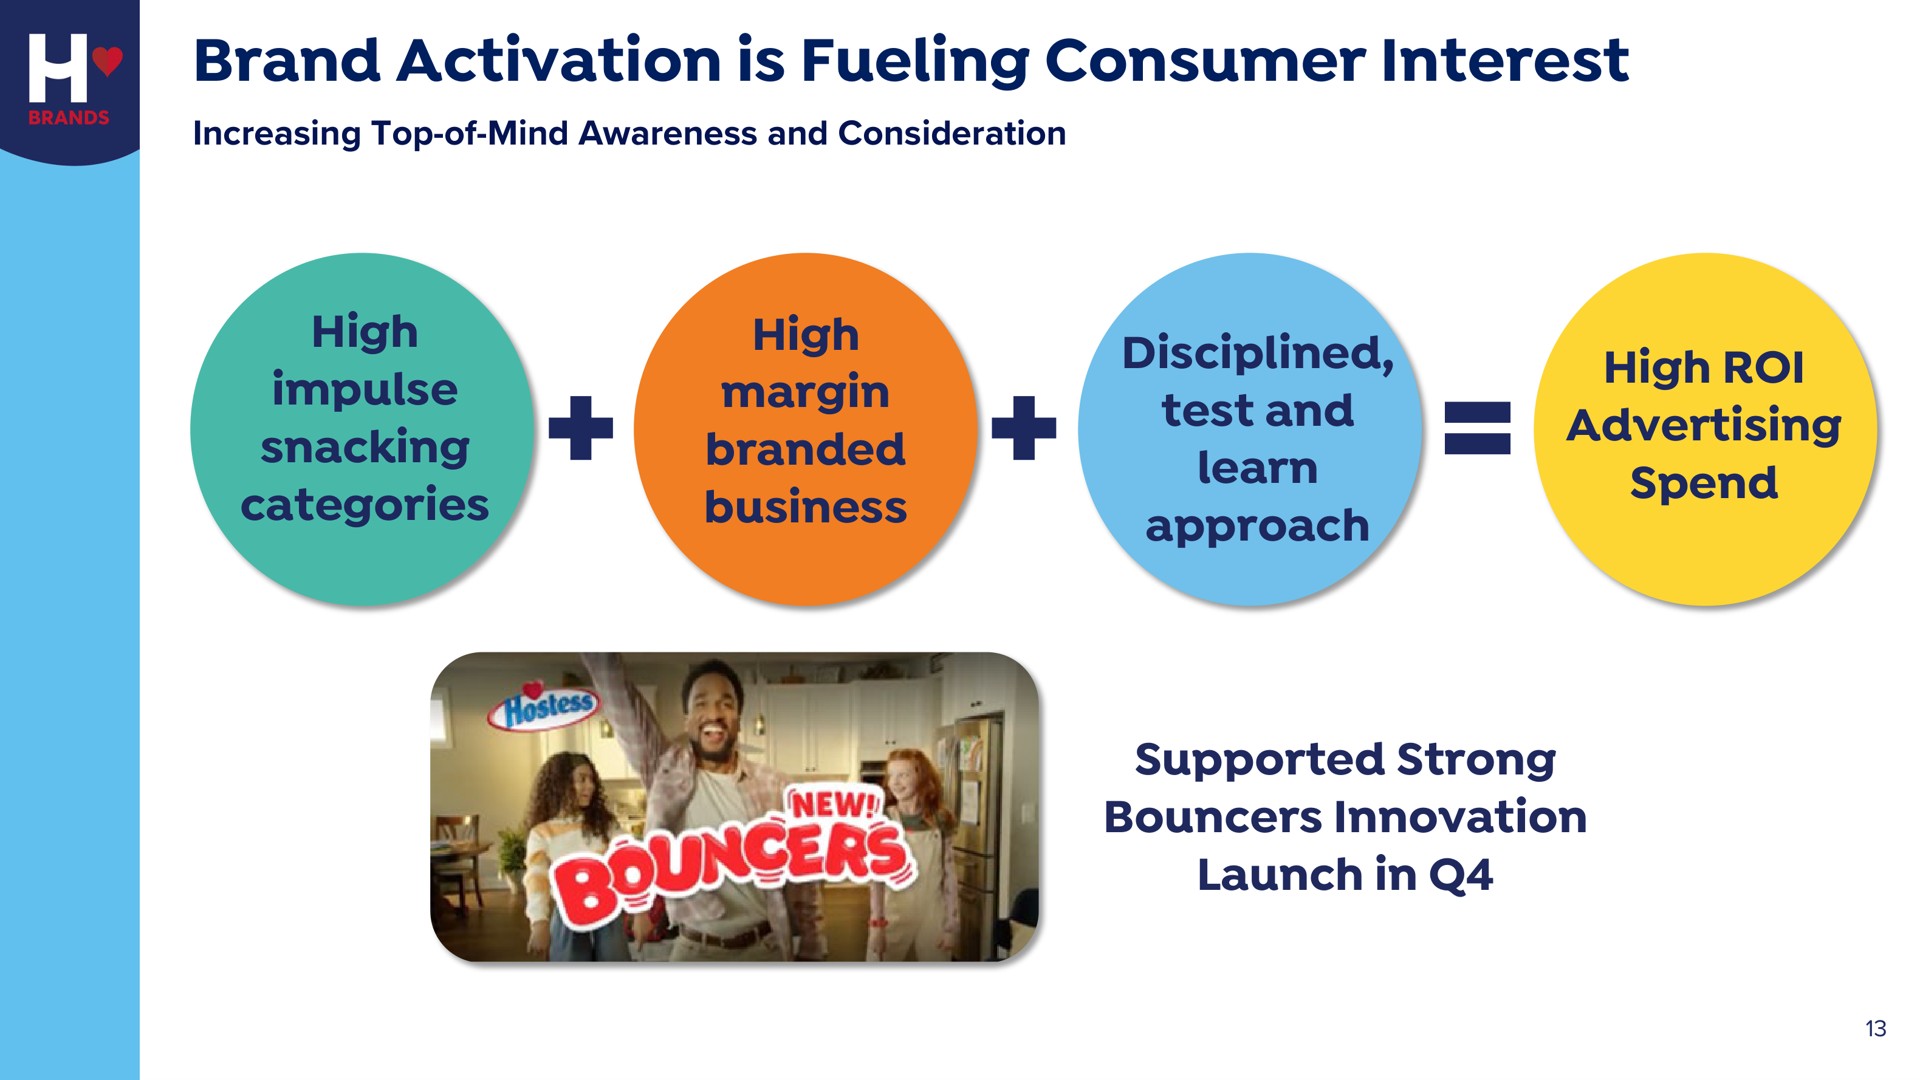 brand activation is fueling consumer interest high impulse snacking categories high margin branded business disciplined test and learn approach high roi advertising spend supported strong bouncers innovation launch in | Hostess